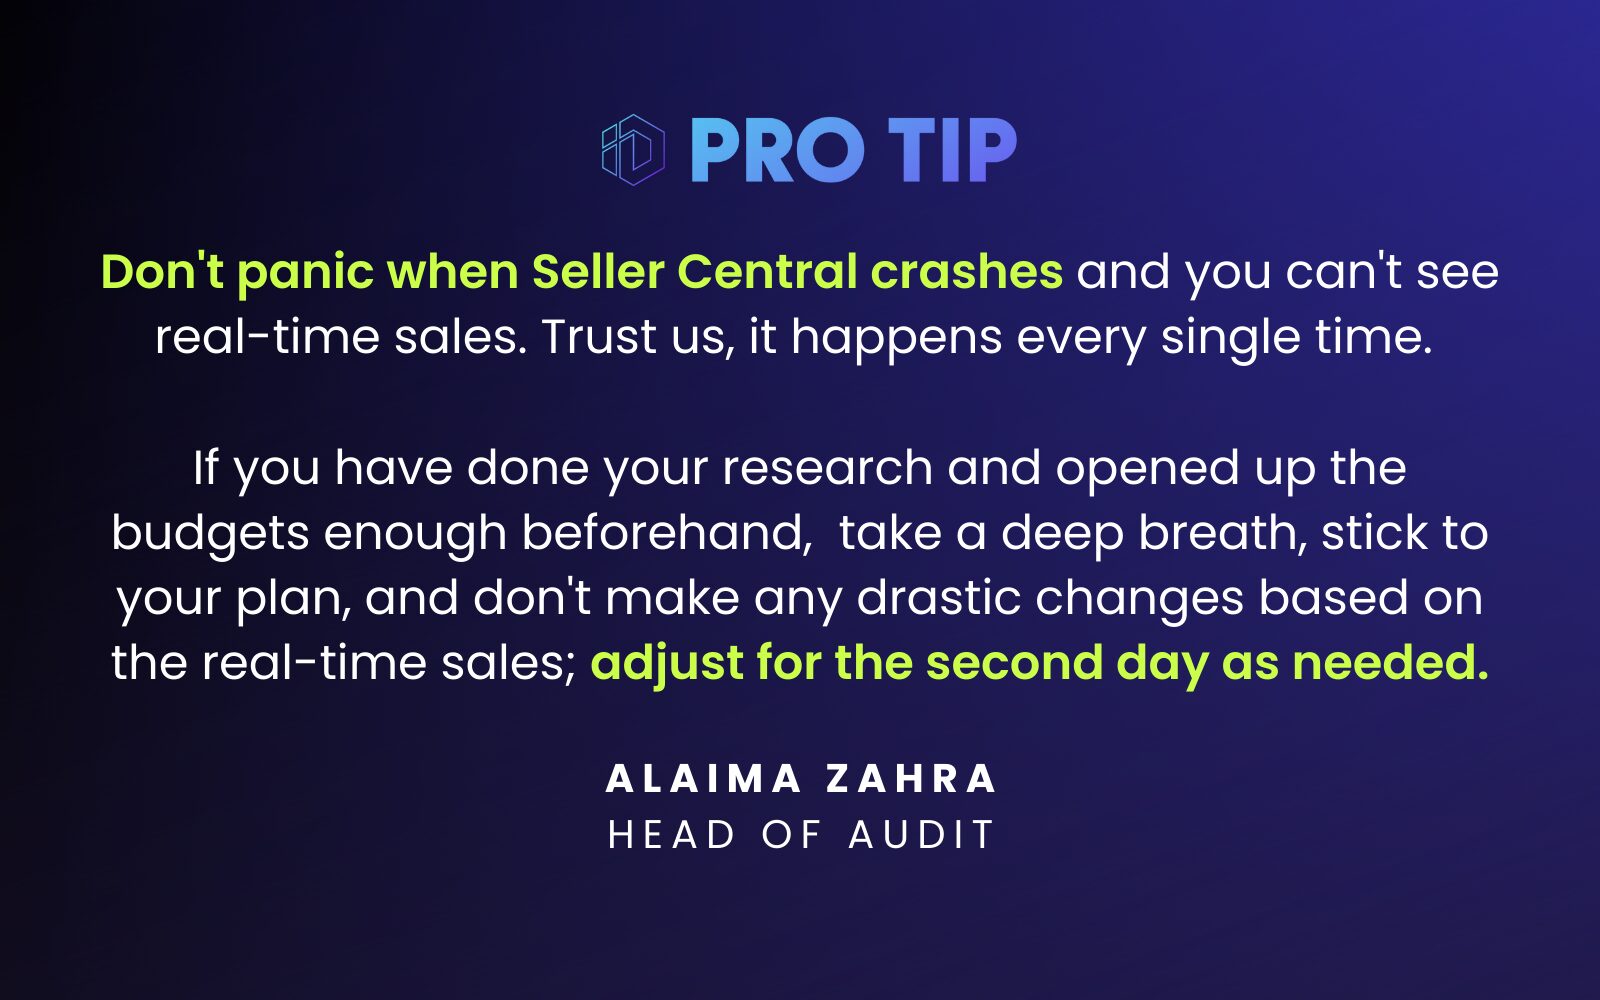 “Don't panic when the Seller Central crashes and you can't see real-time sales. Trust us, it happens every single time. If you have done your research and planning, and opened up the budgets sufficiently beforehand, take a deep breath or go for a walk when that happens. Stick to your plan and don't make any drastic changes based on the real-time sales; make adjustments for the second day as needed.” Alaima Zahra Head of Audit